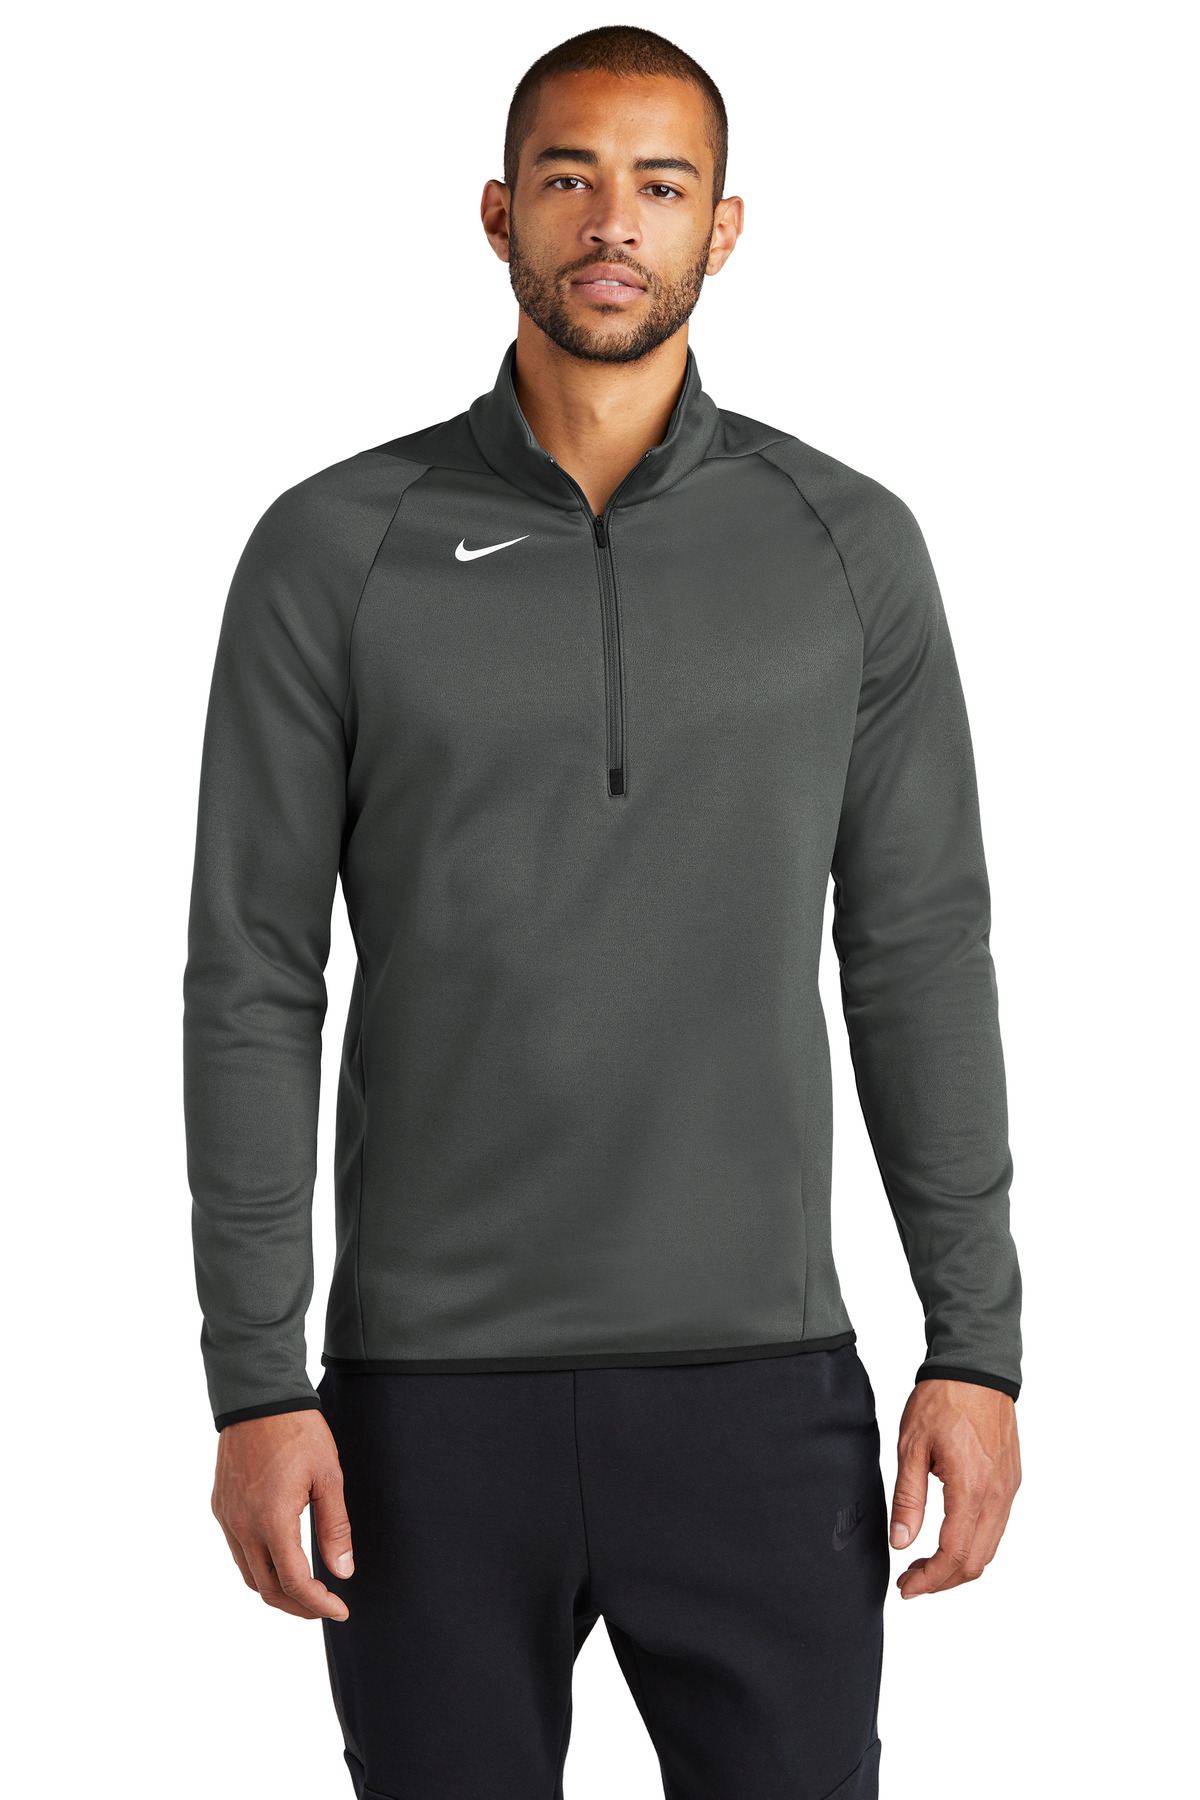 LIMITED EDITION Nike Therma-FIT 1/4-Zip Fleece-